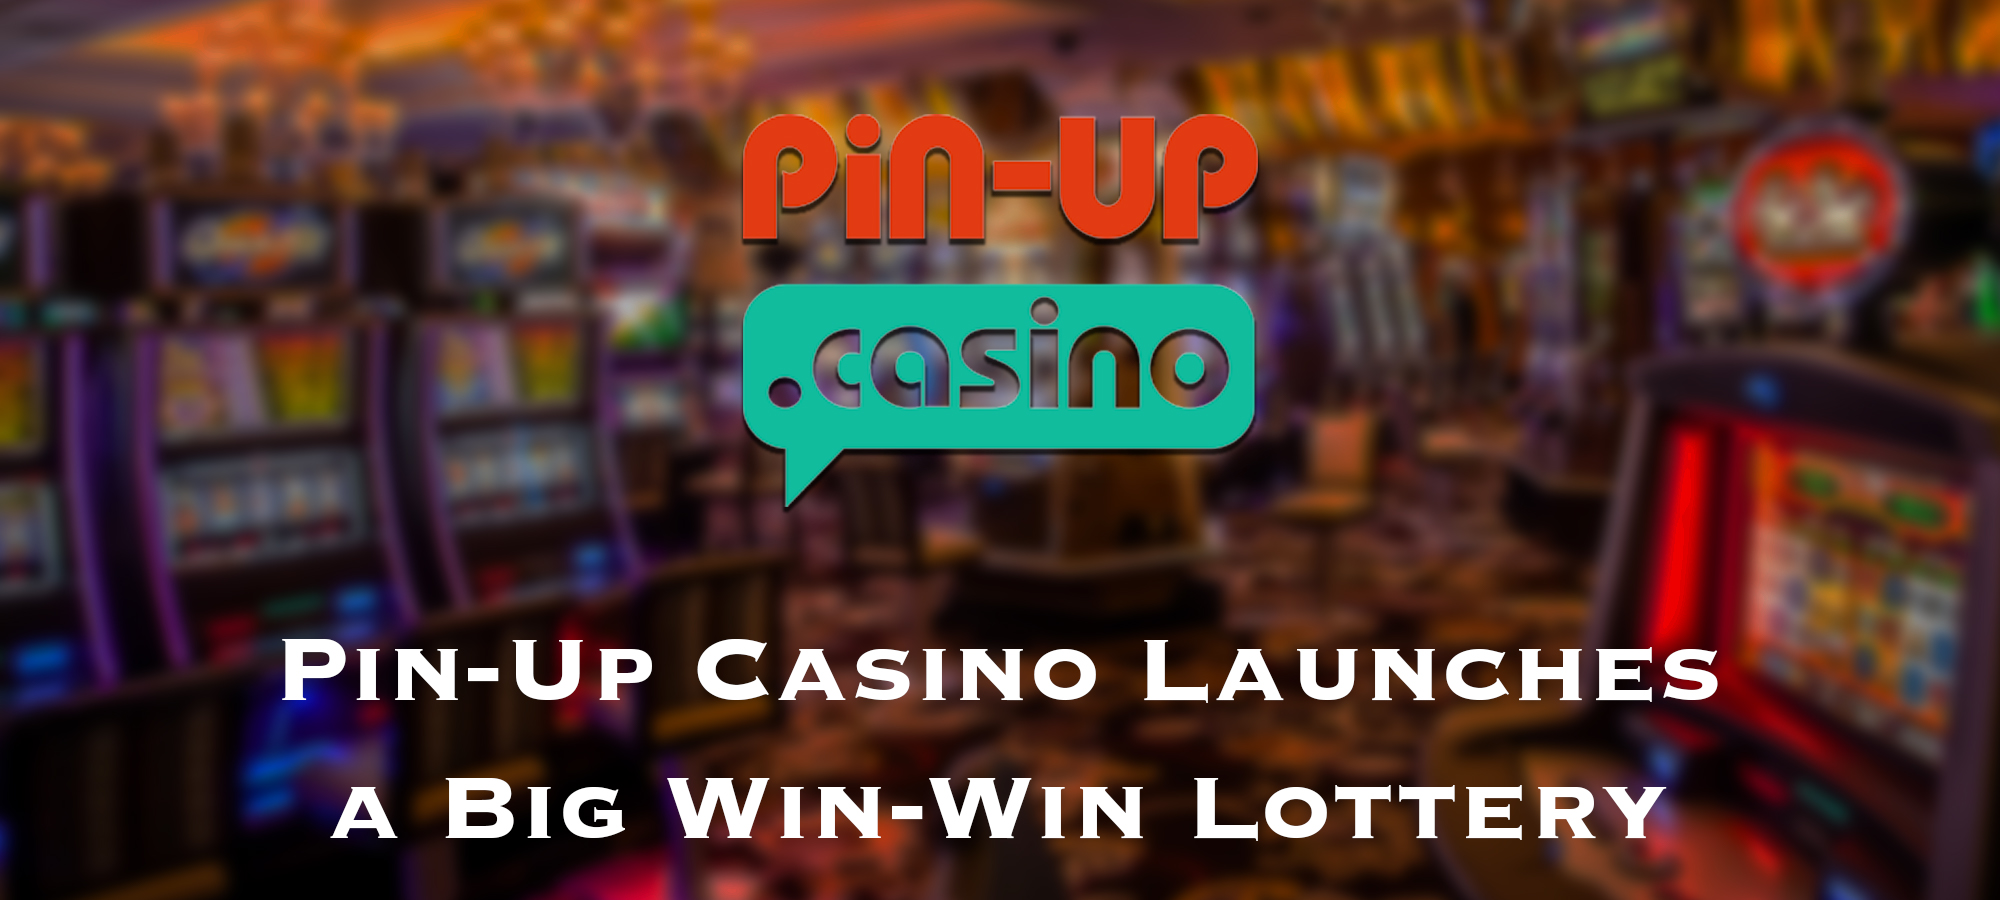 Pin-Up Casino Launches a Big Win-Win Lottery